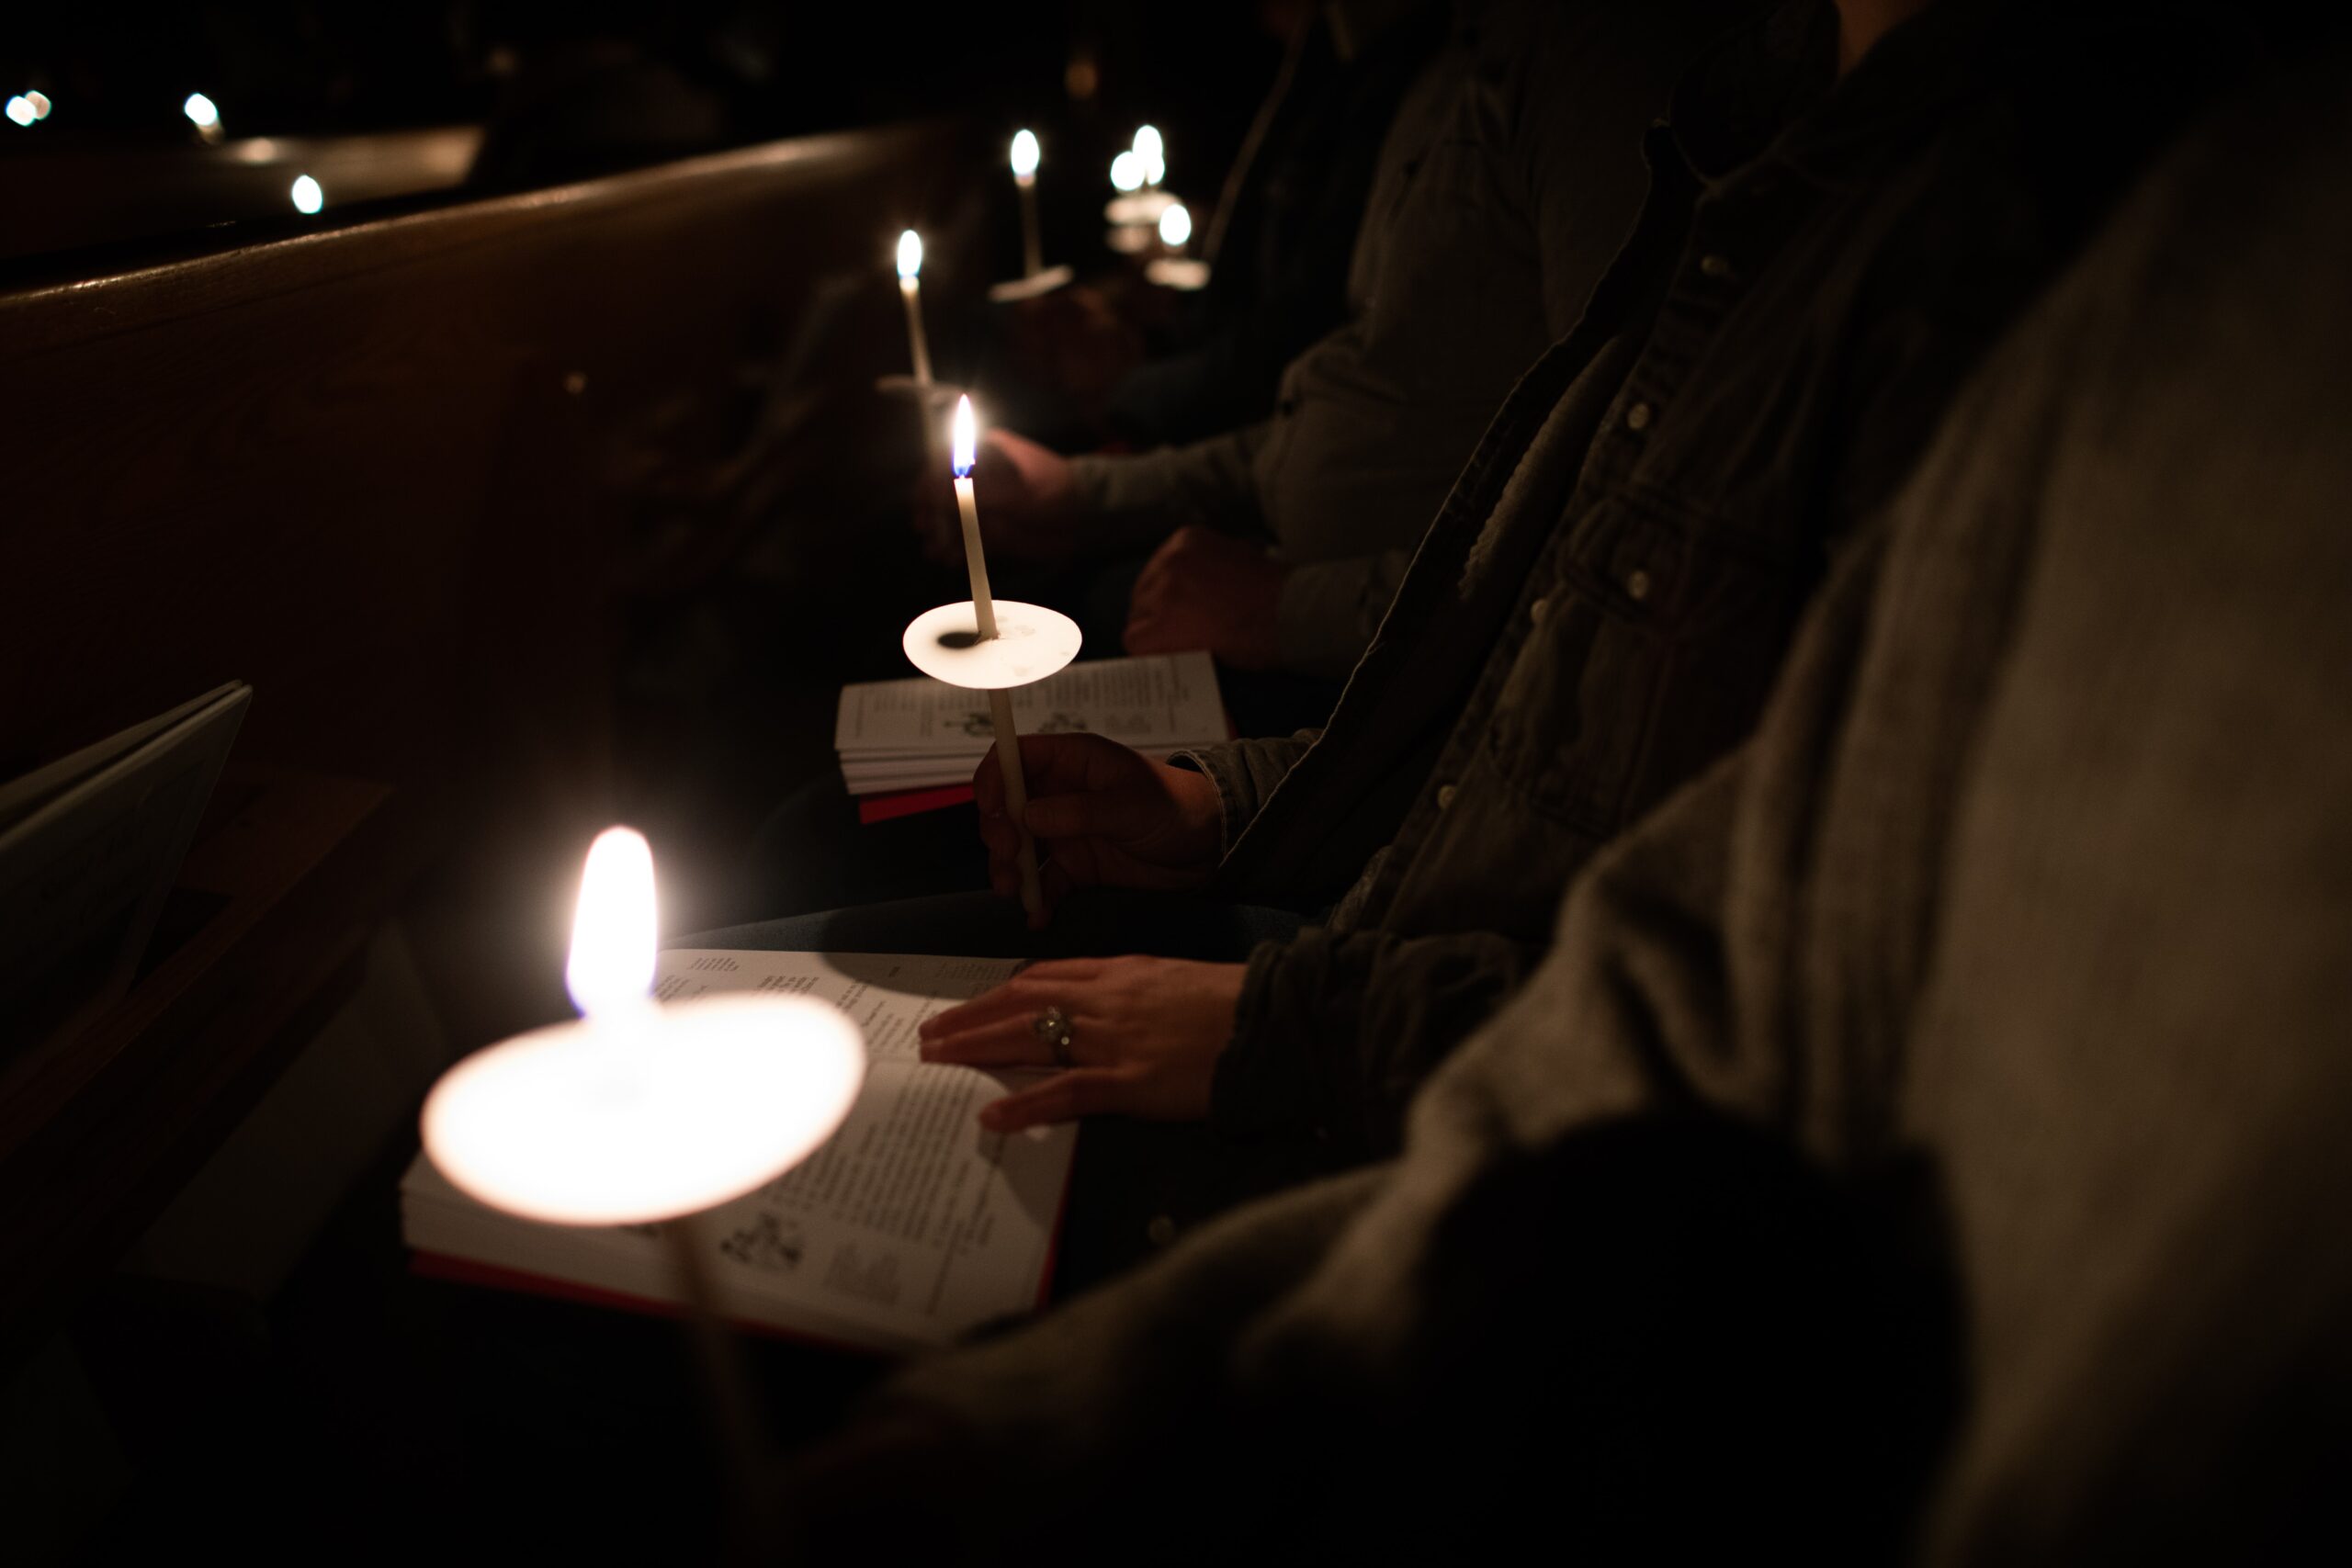 churchgoers in pews hold candles and songbooks